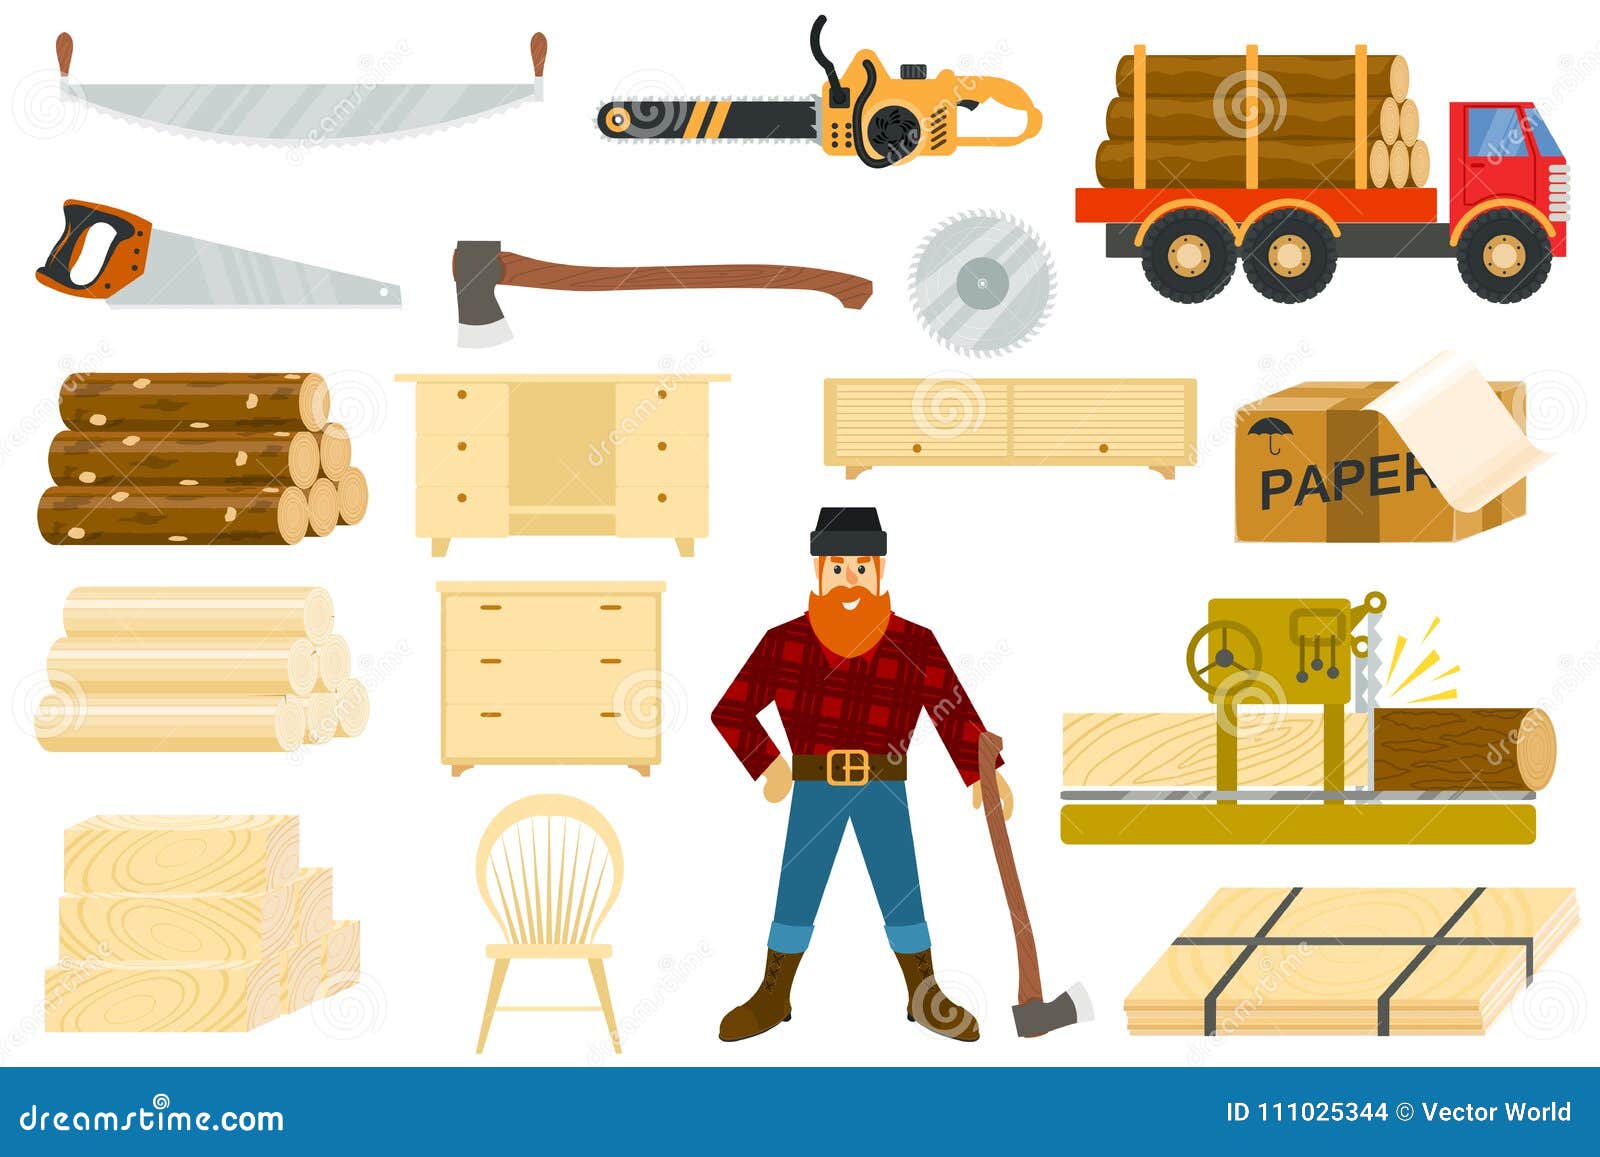 timber  woodcutter character or logger saws lumber or hardwood set of wooden timbered materials in sawmill